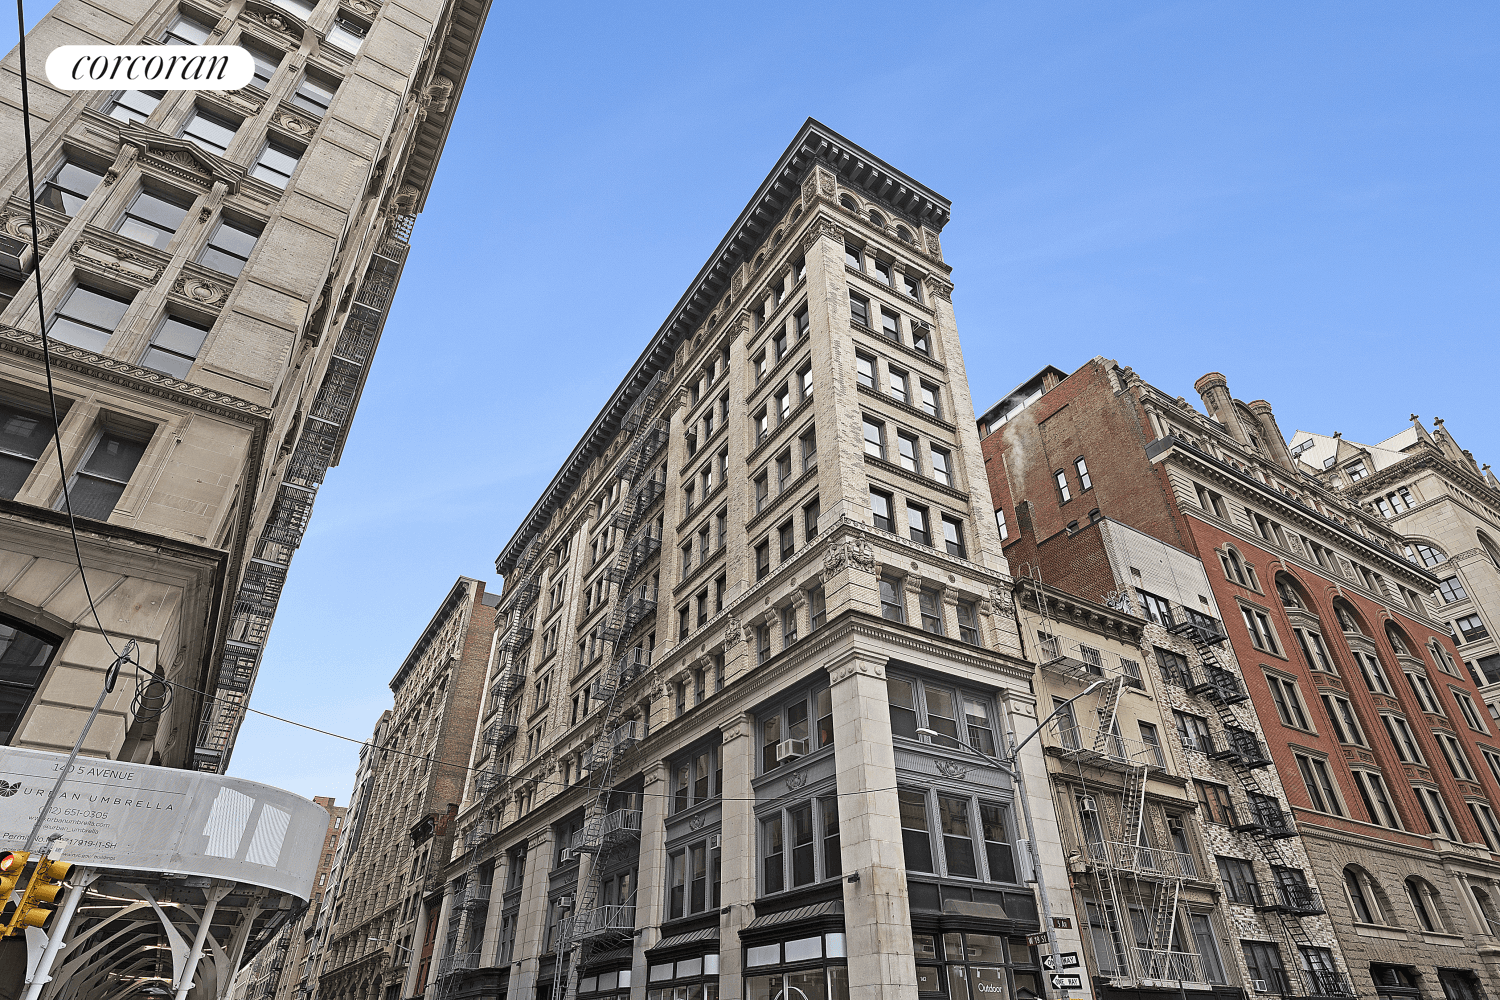 142 Fifth Avenue 19TH st Entire 9th Floor OVER 7500SF of LOFT LIVING Income producing Rare opportunity to acquire a uniquely combined Approx.